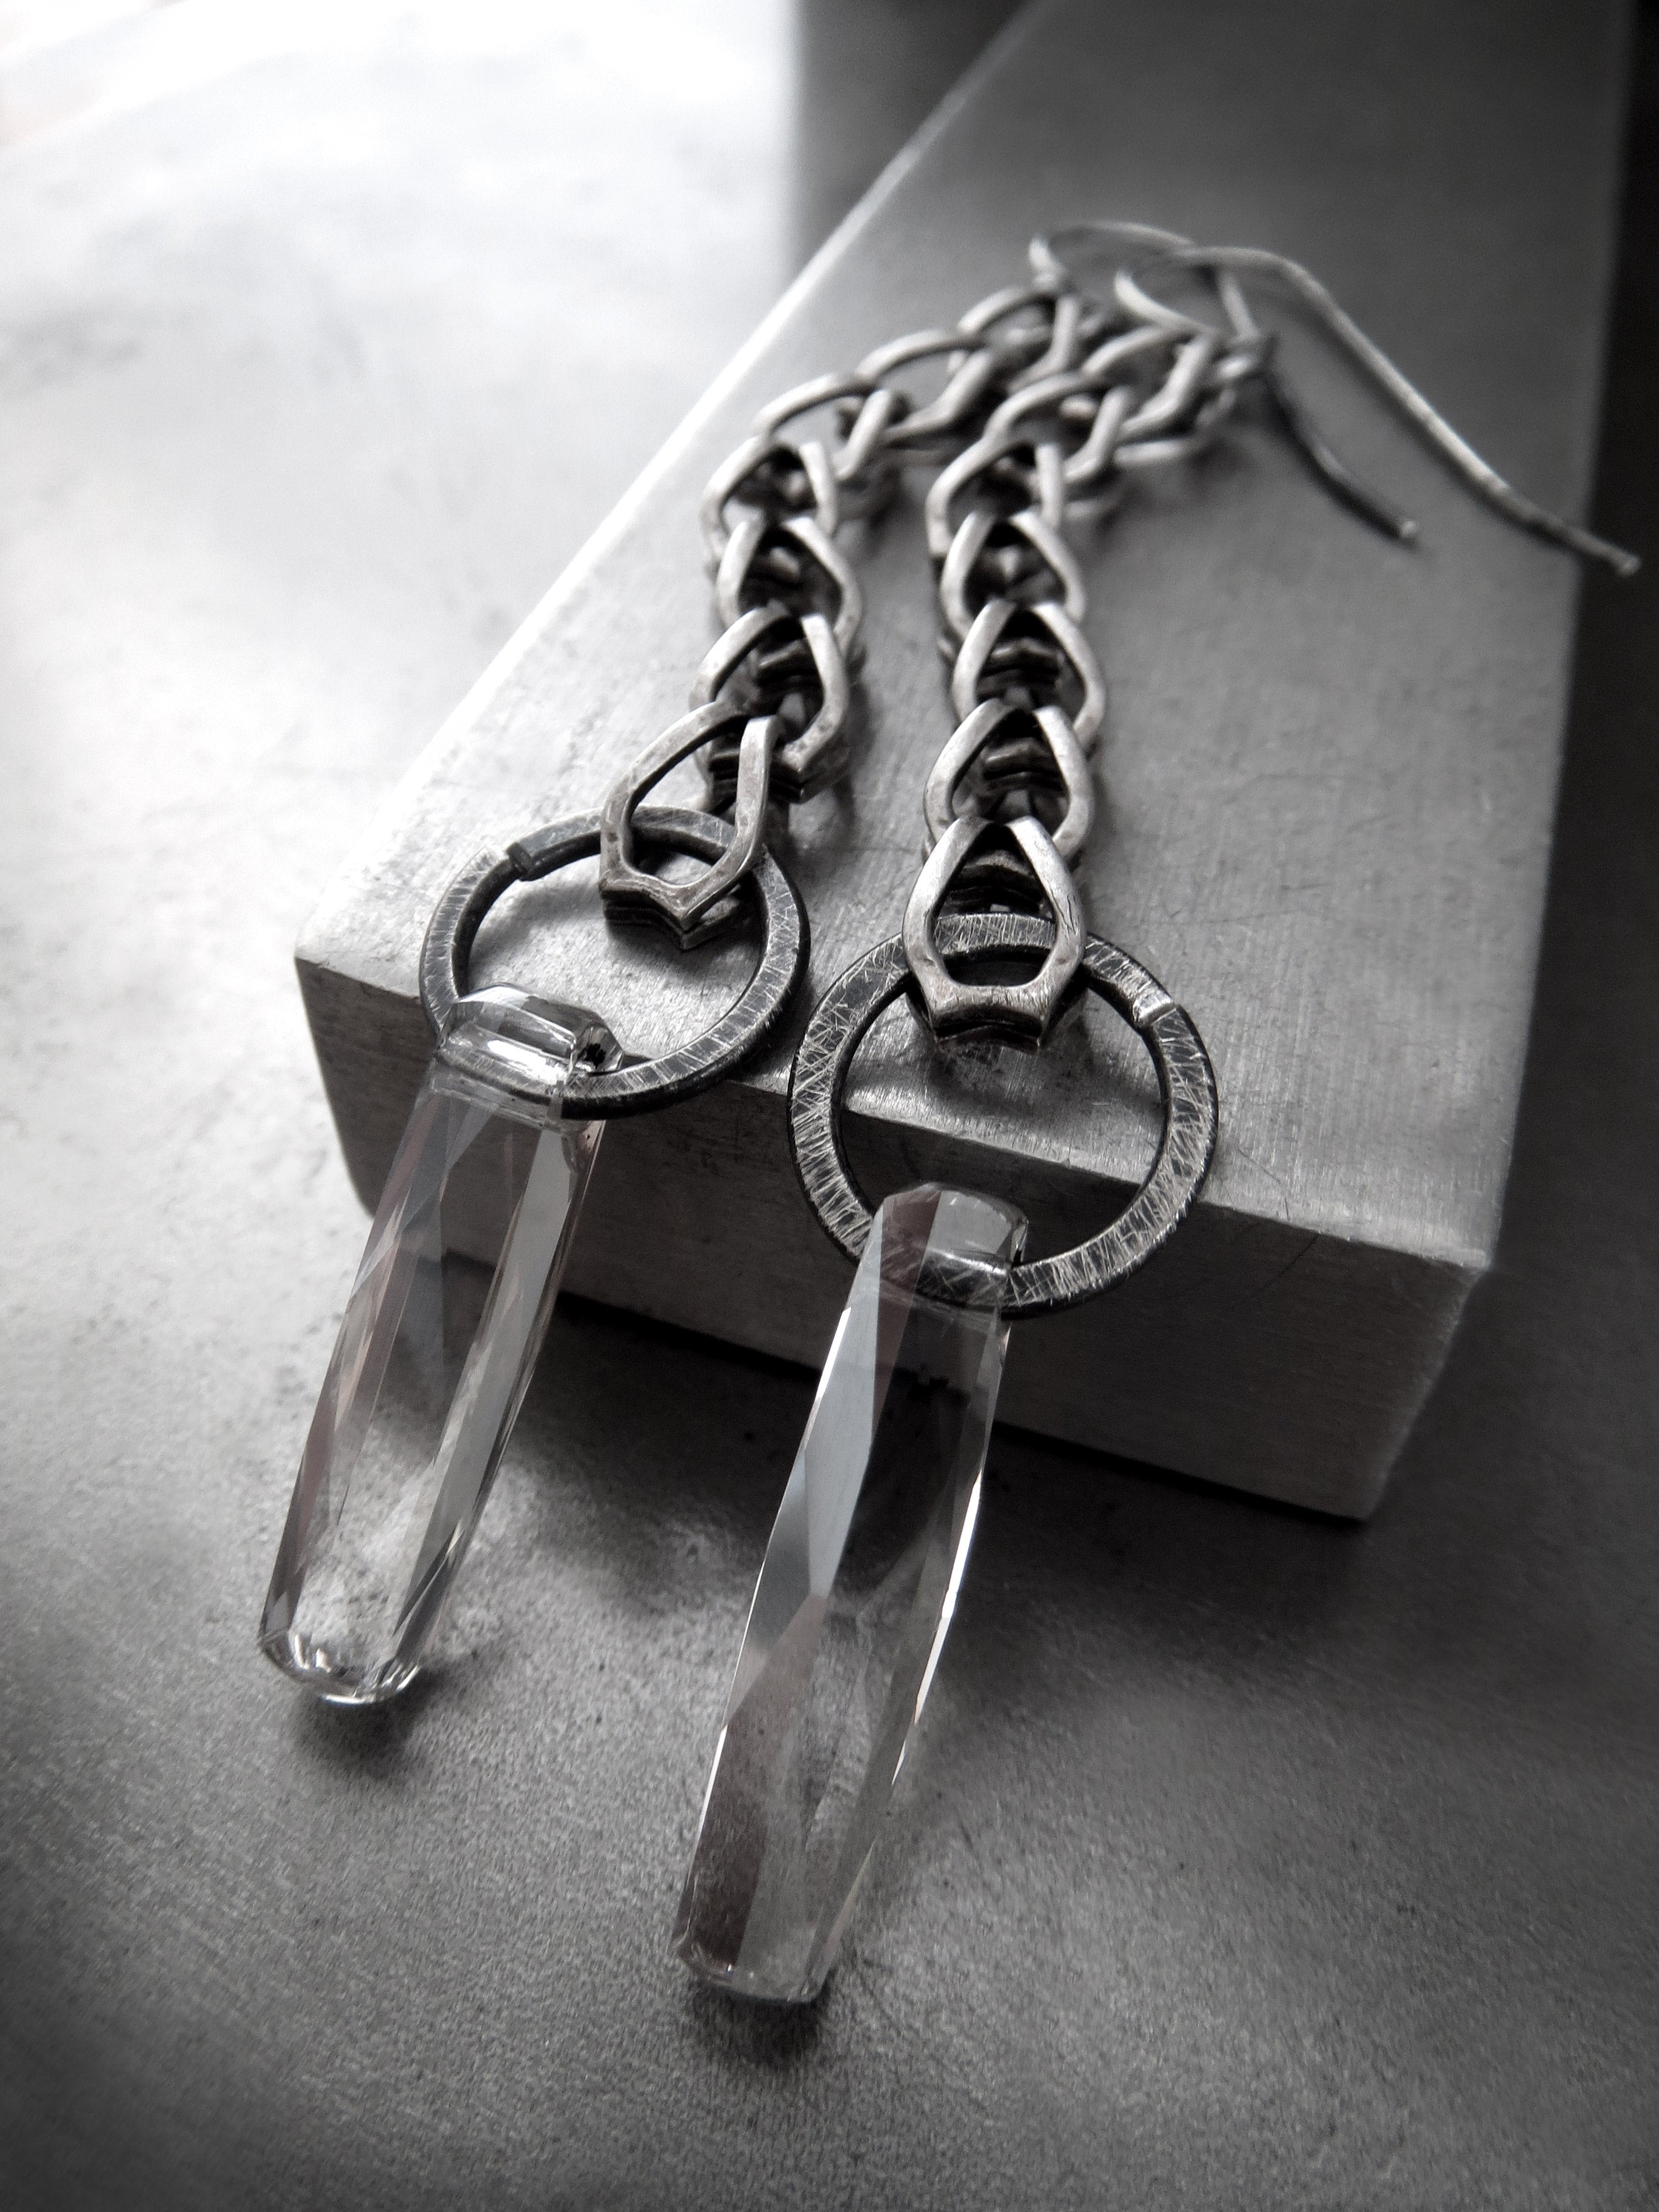 CONNECT - Long Linear Earrings with Clear Crystal